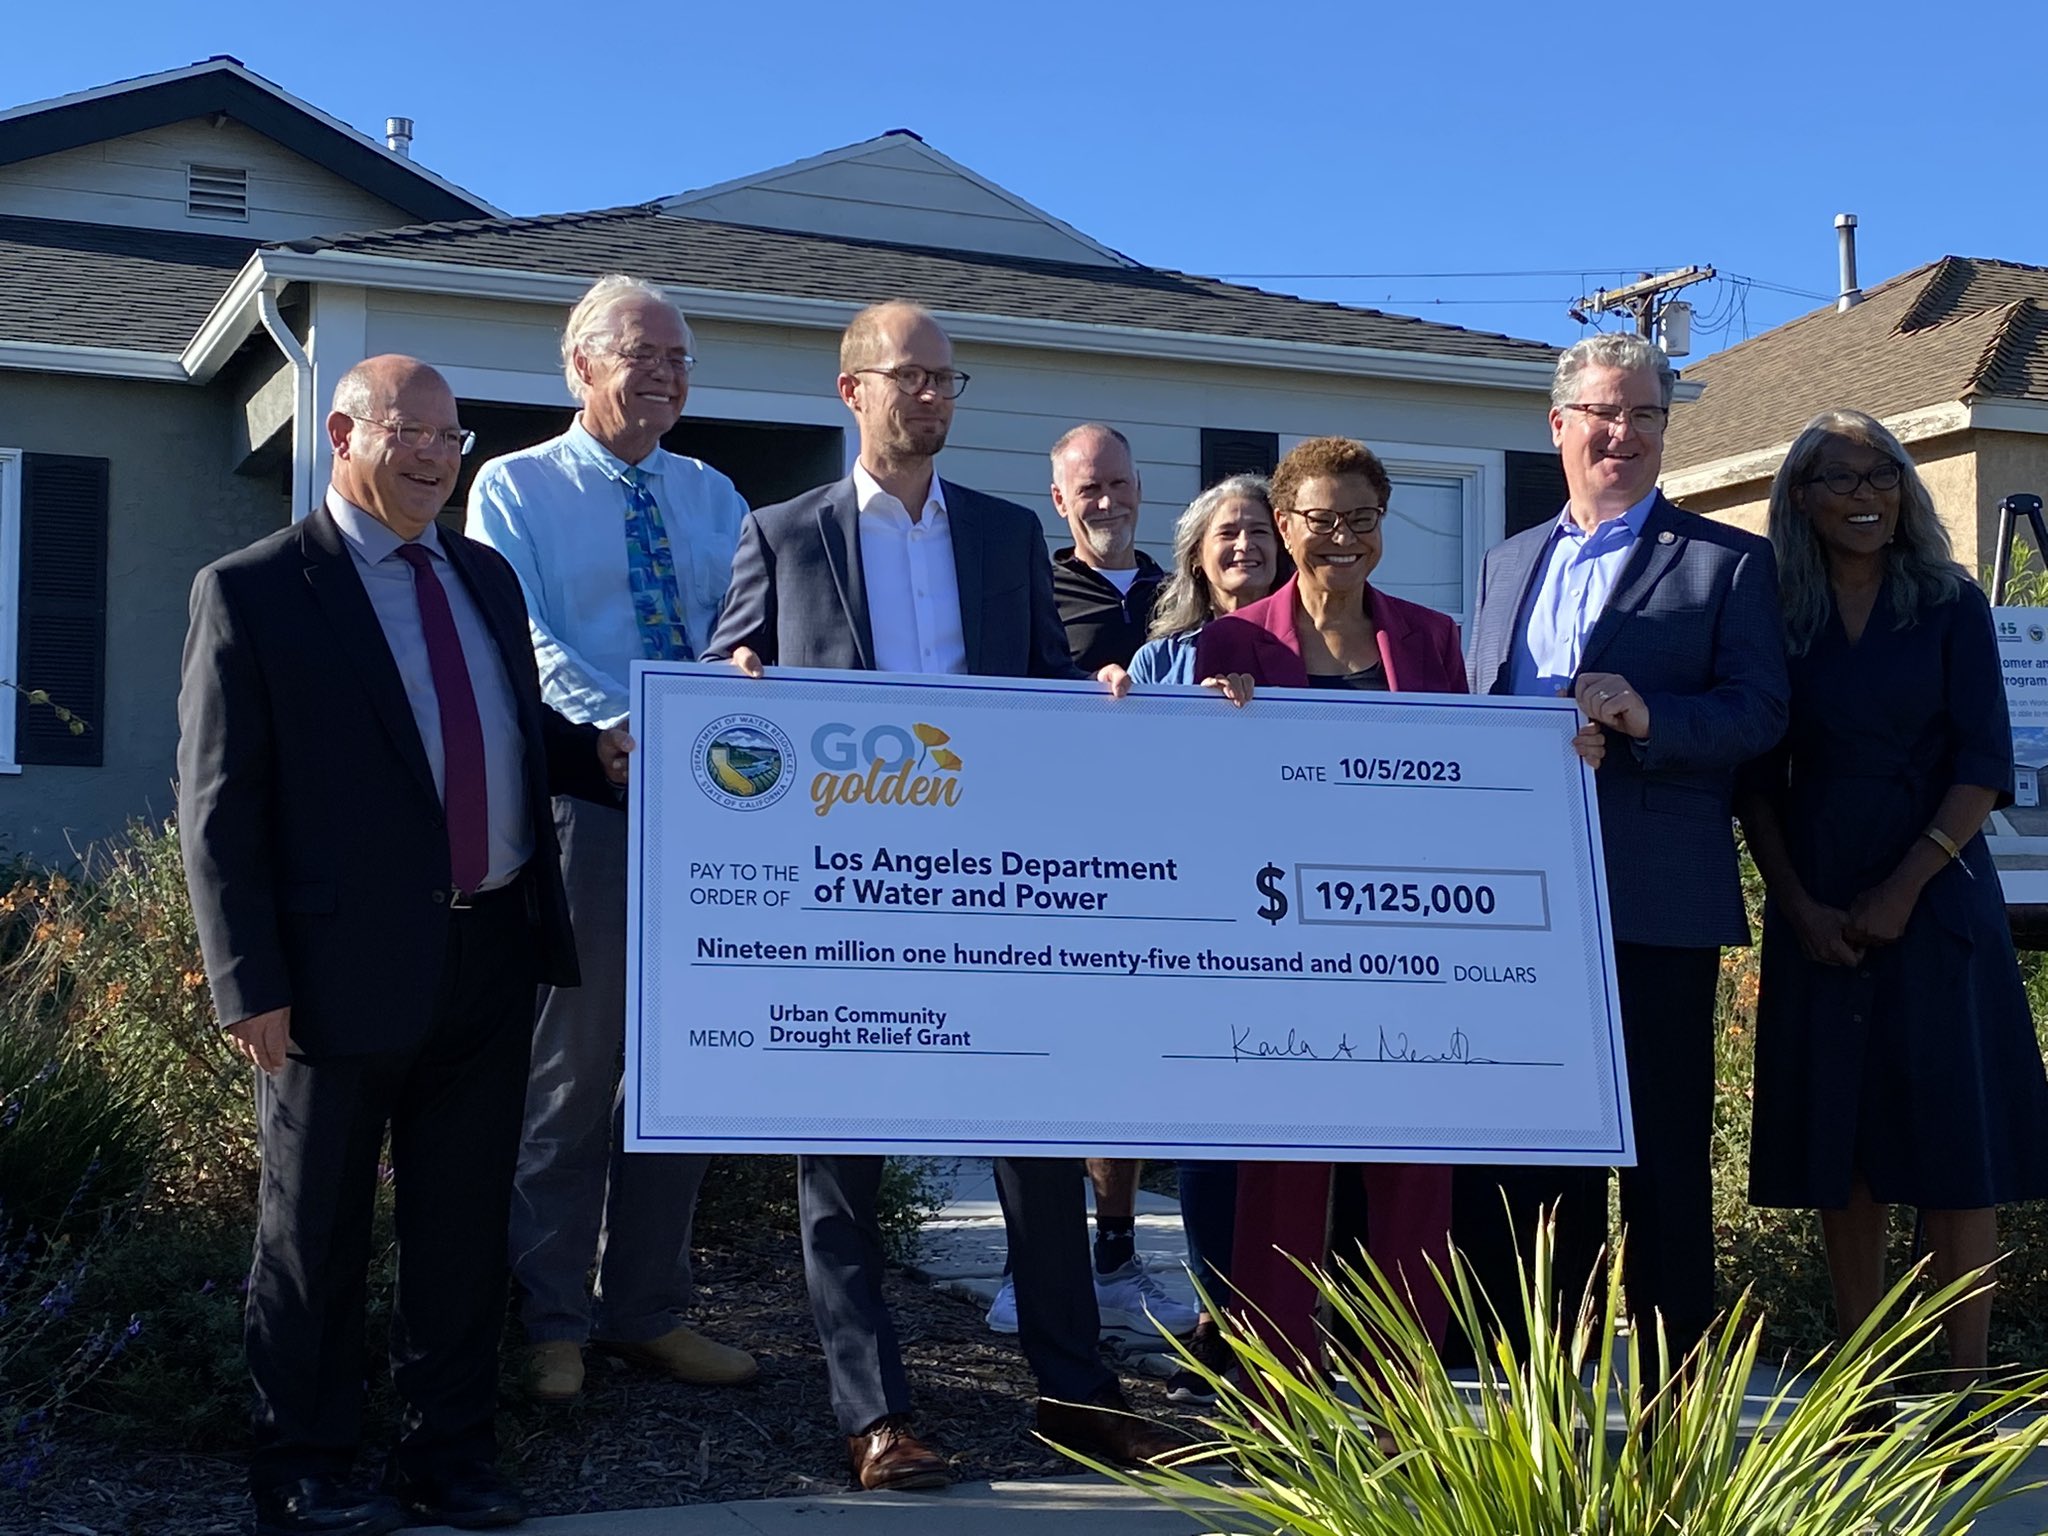 Los Angeles Mayor Karen Bass, Deputy Director Integrated Watershed Management Kristopher Tjernell, and others present a Go Golden check at a house that received funds to replace their lawn with drought-resistant plants.